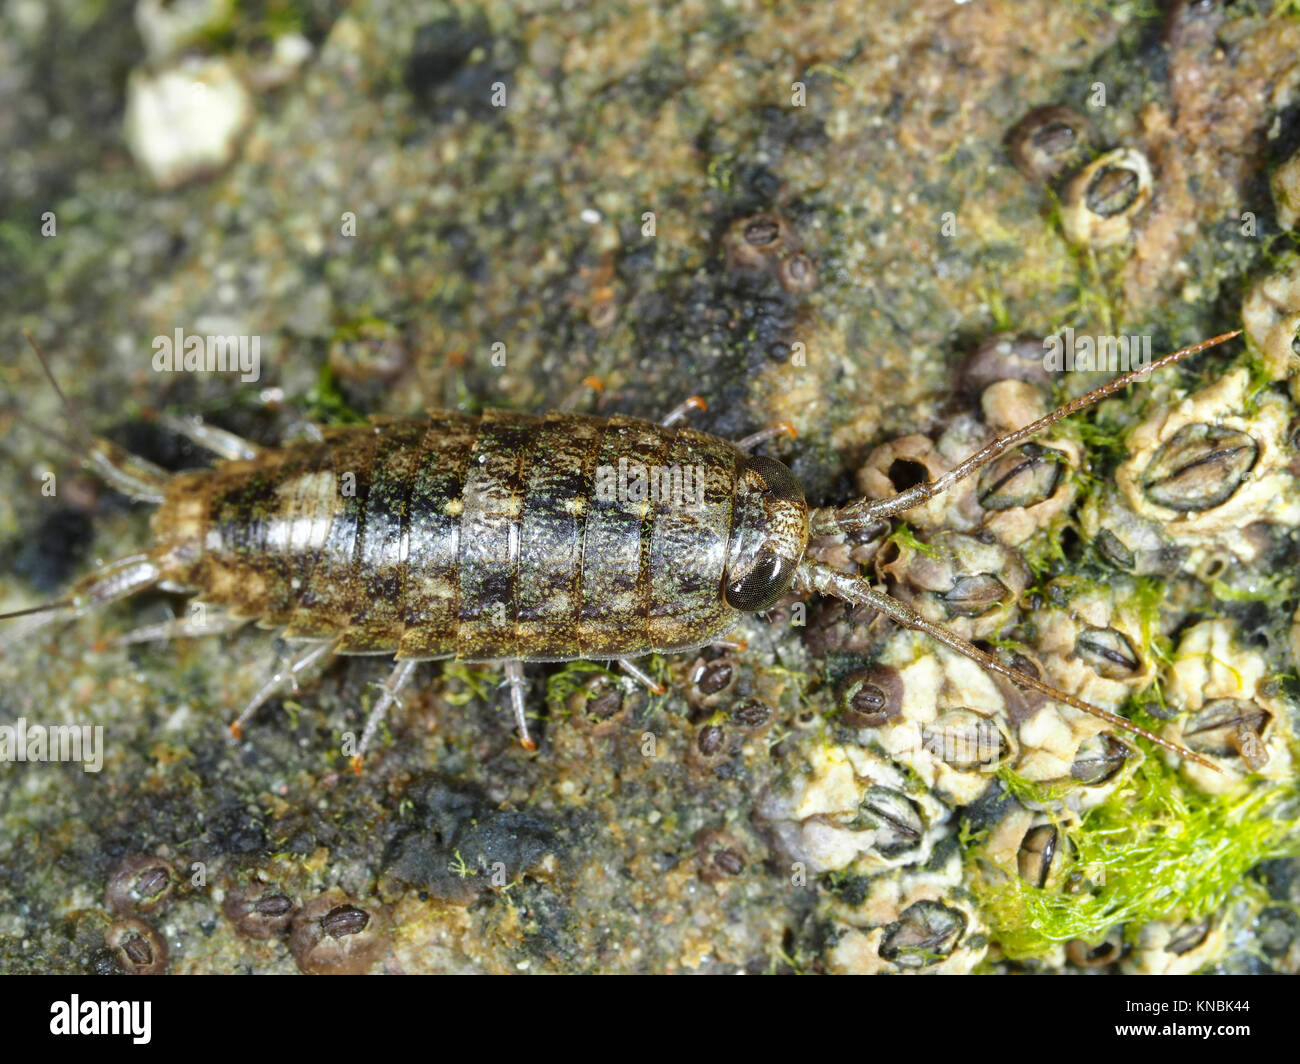 Ligia occidentalis (known as sea slater and rock louse) among barnacles on a rock on a Pacific ocean beach in Southern California Stock Photo